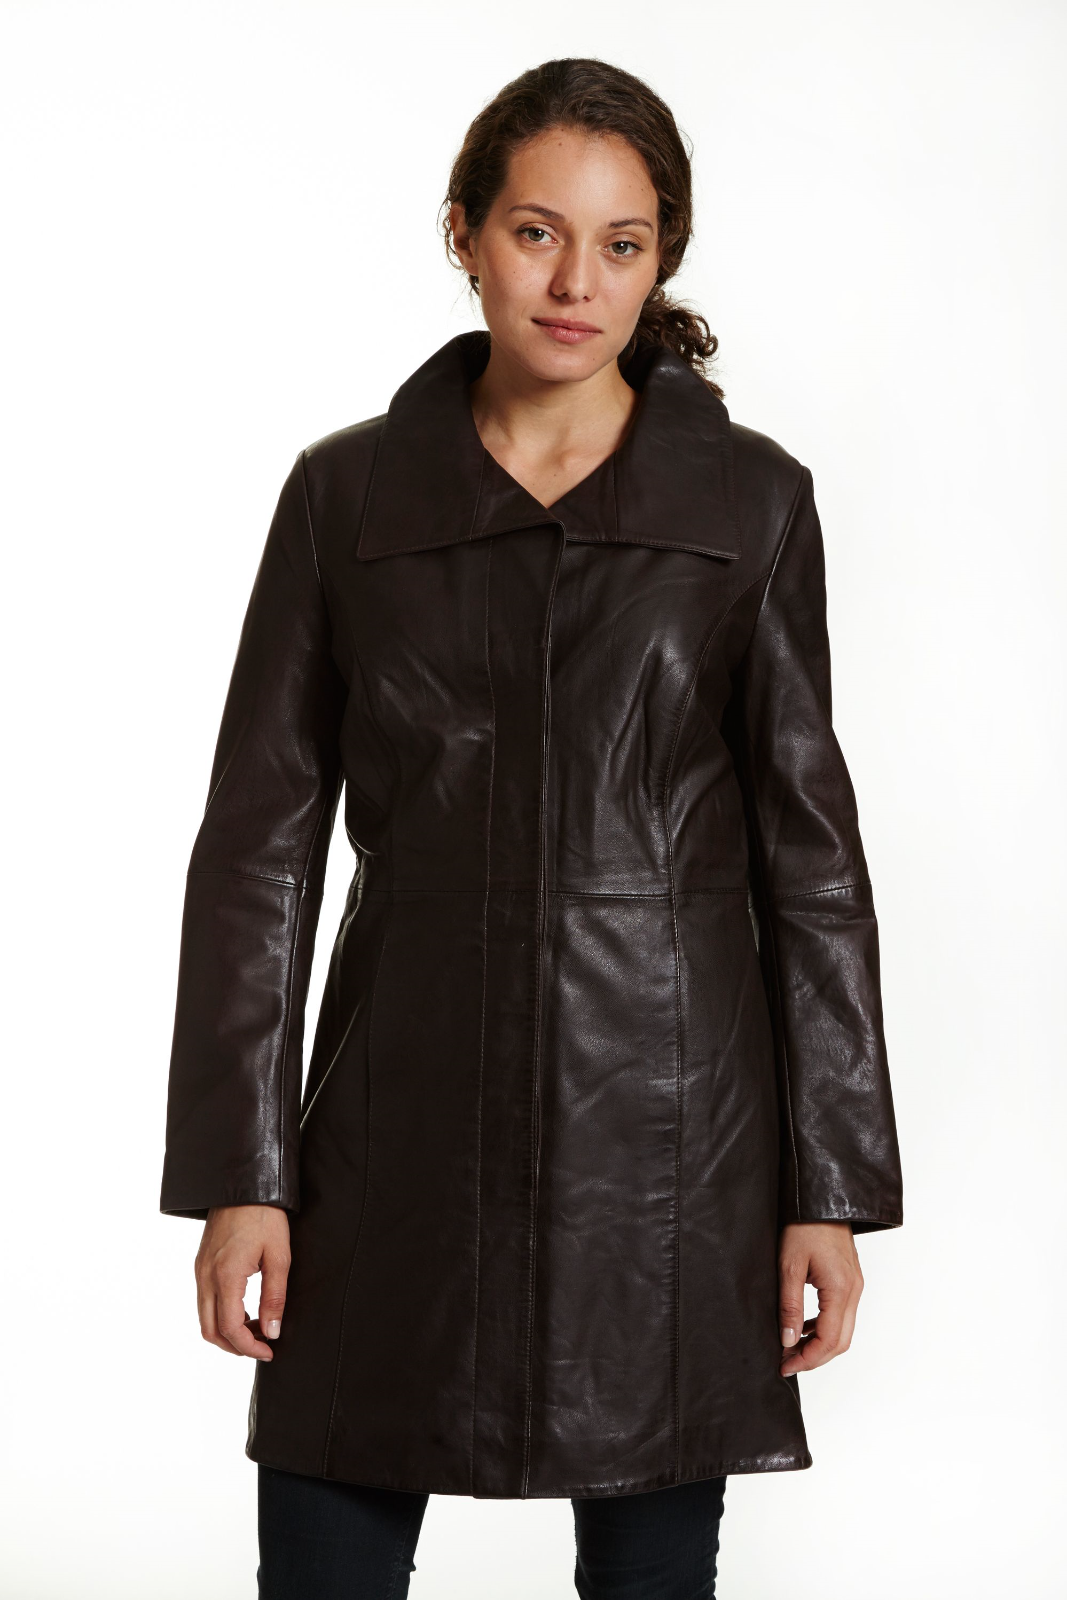 Excelled Women’s Lambskin Leather Walking Coat Brown XL #NK8Q5-M822 ...